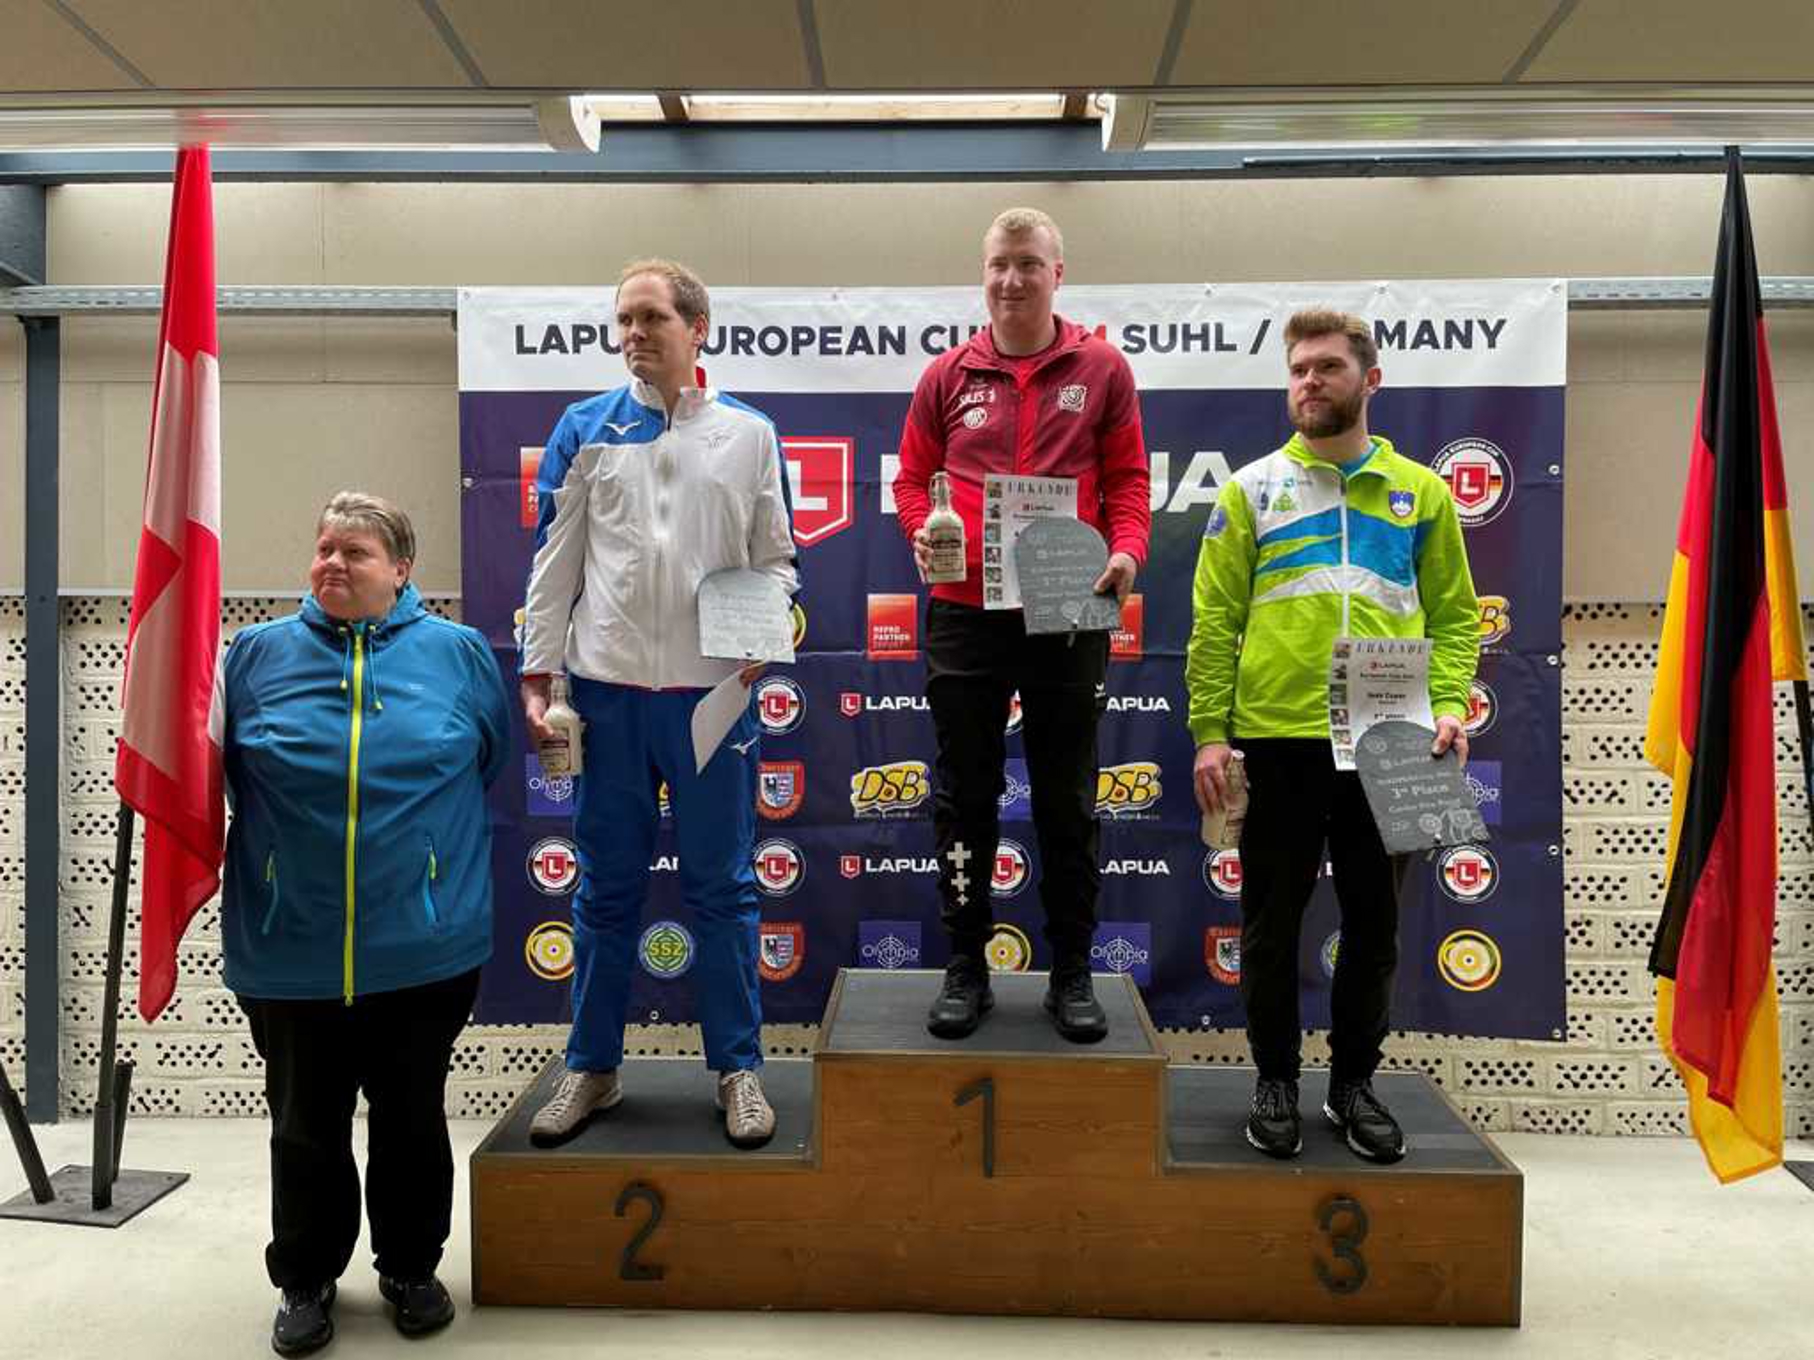 Adrian Schaub wins the European Cup in Suhl (GER) with a Centerfire pistol ahead of Kévin Chapon (FRA) and Joze Ceper (SLO)